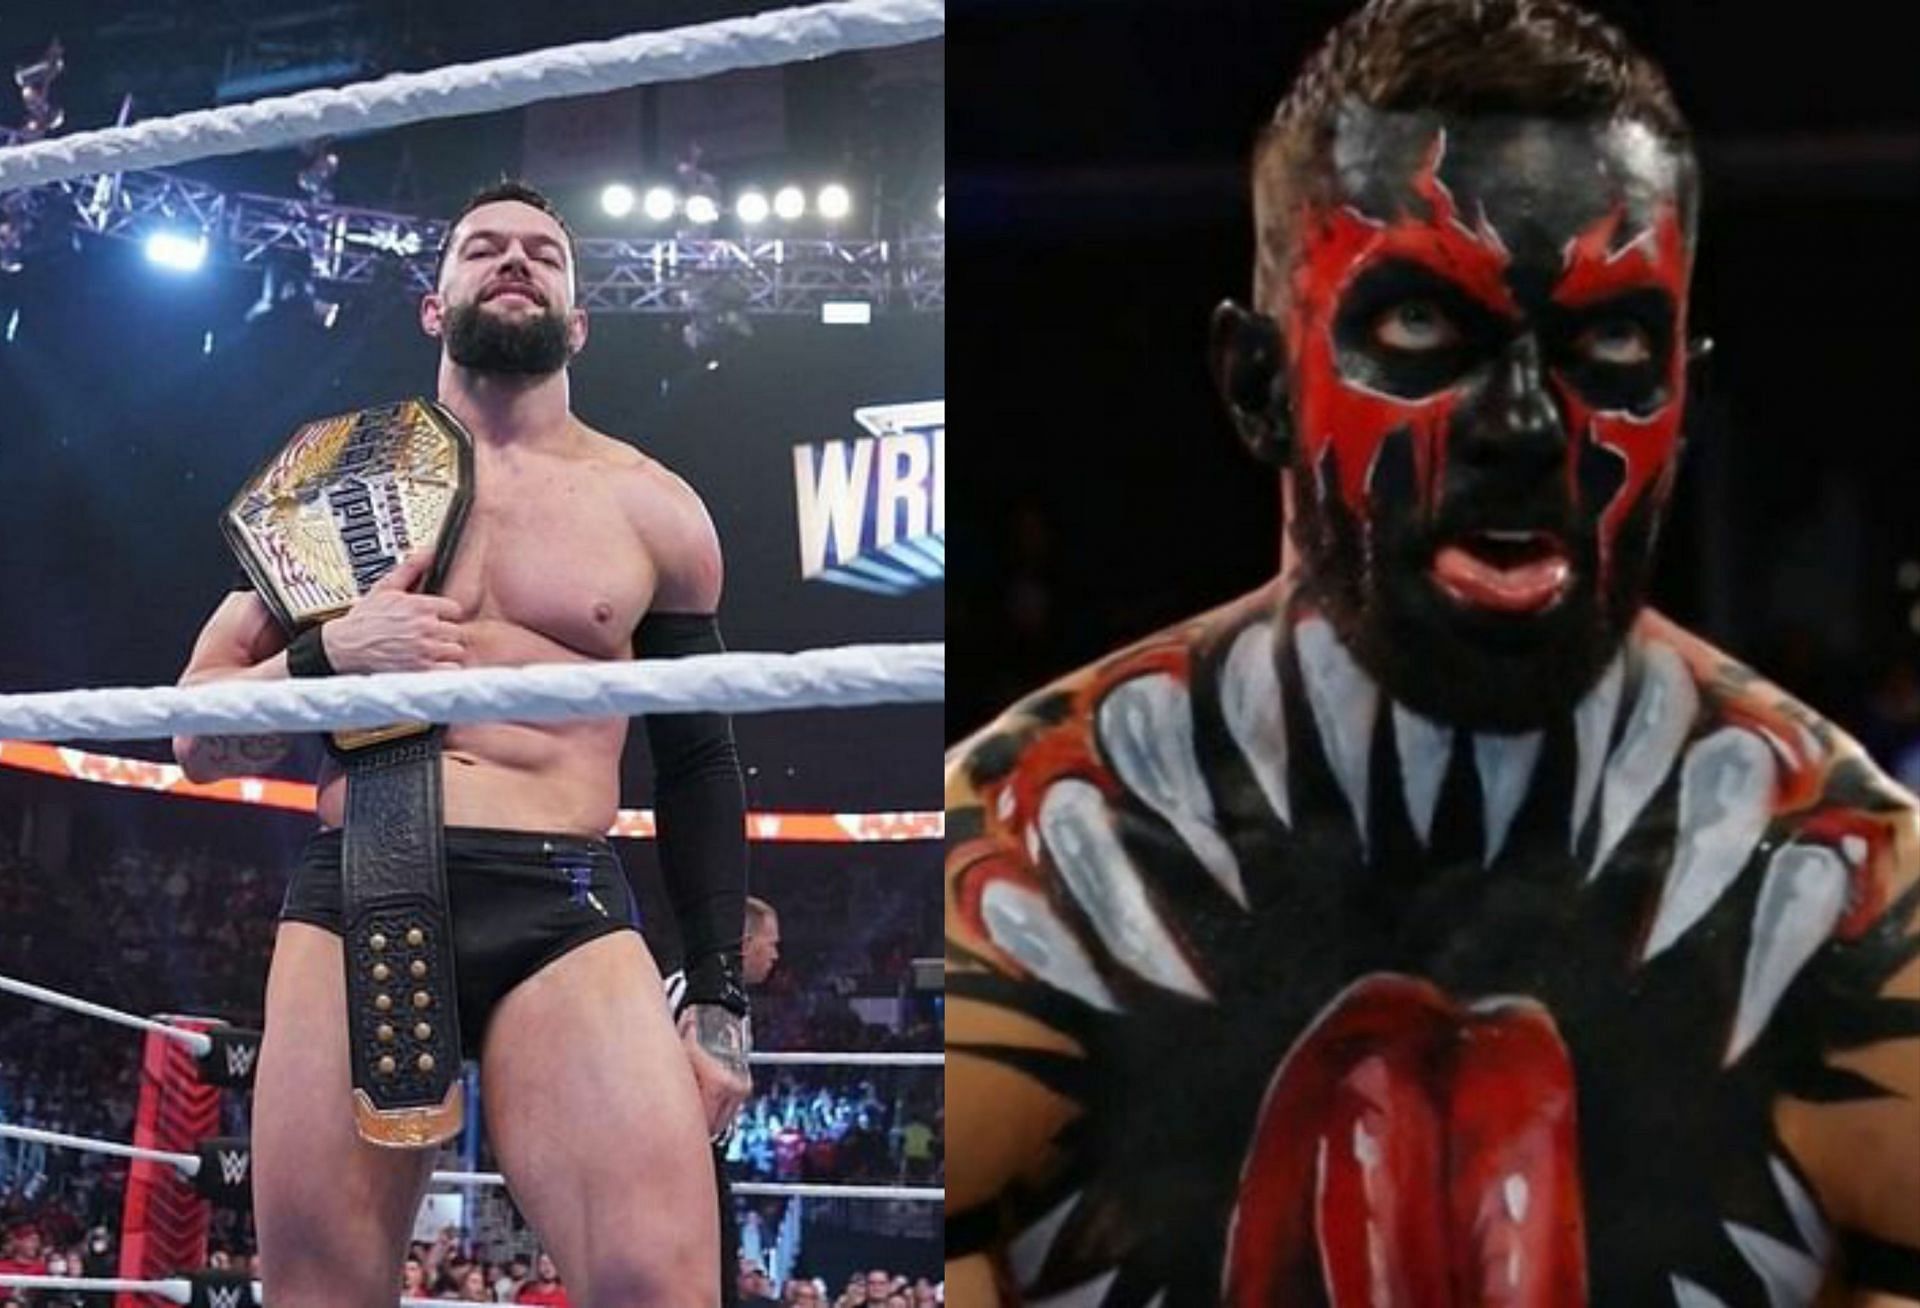 Finn Balor embracing his alter-ego as a heel would surely make for an interesting watch.